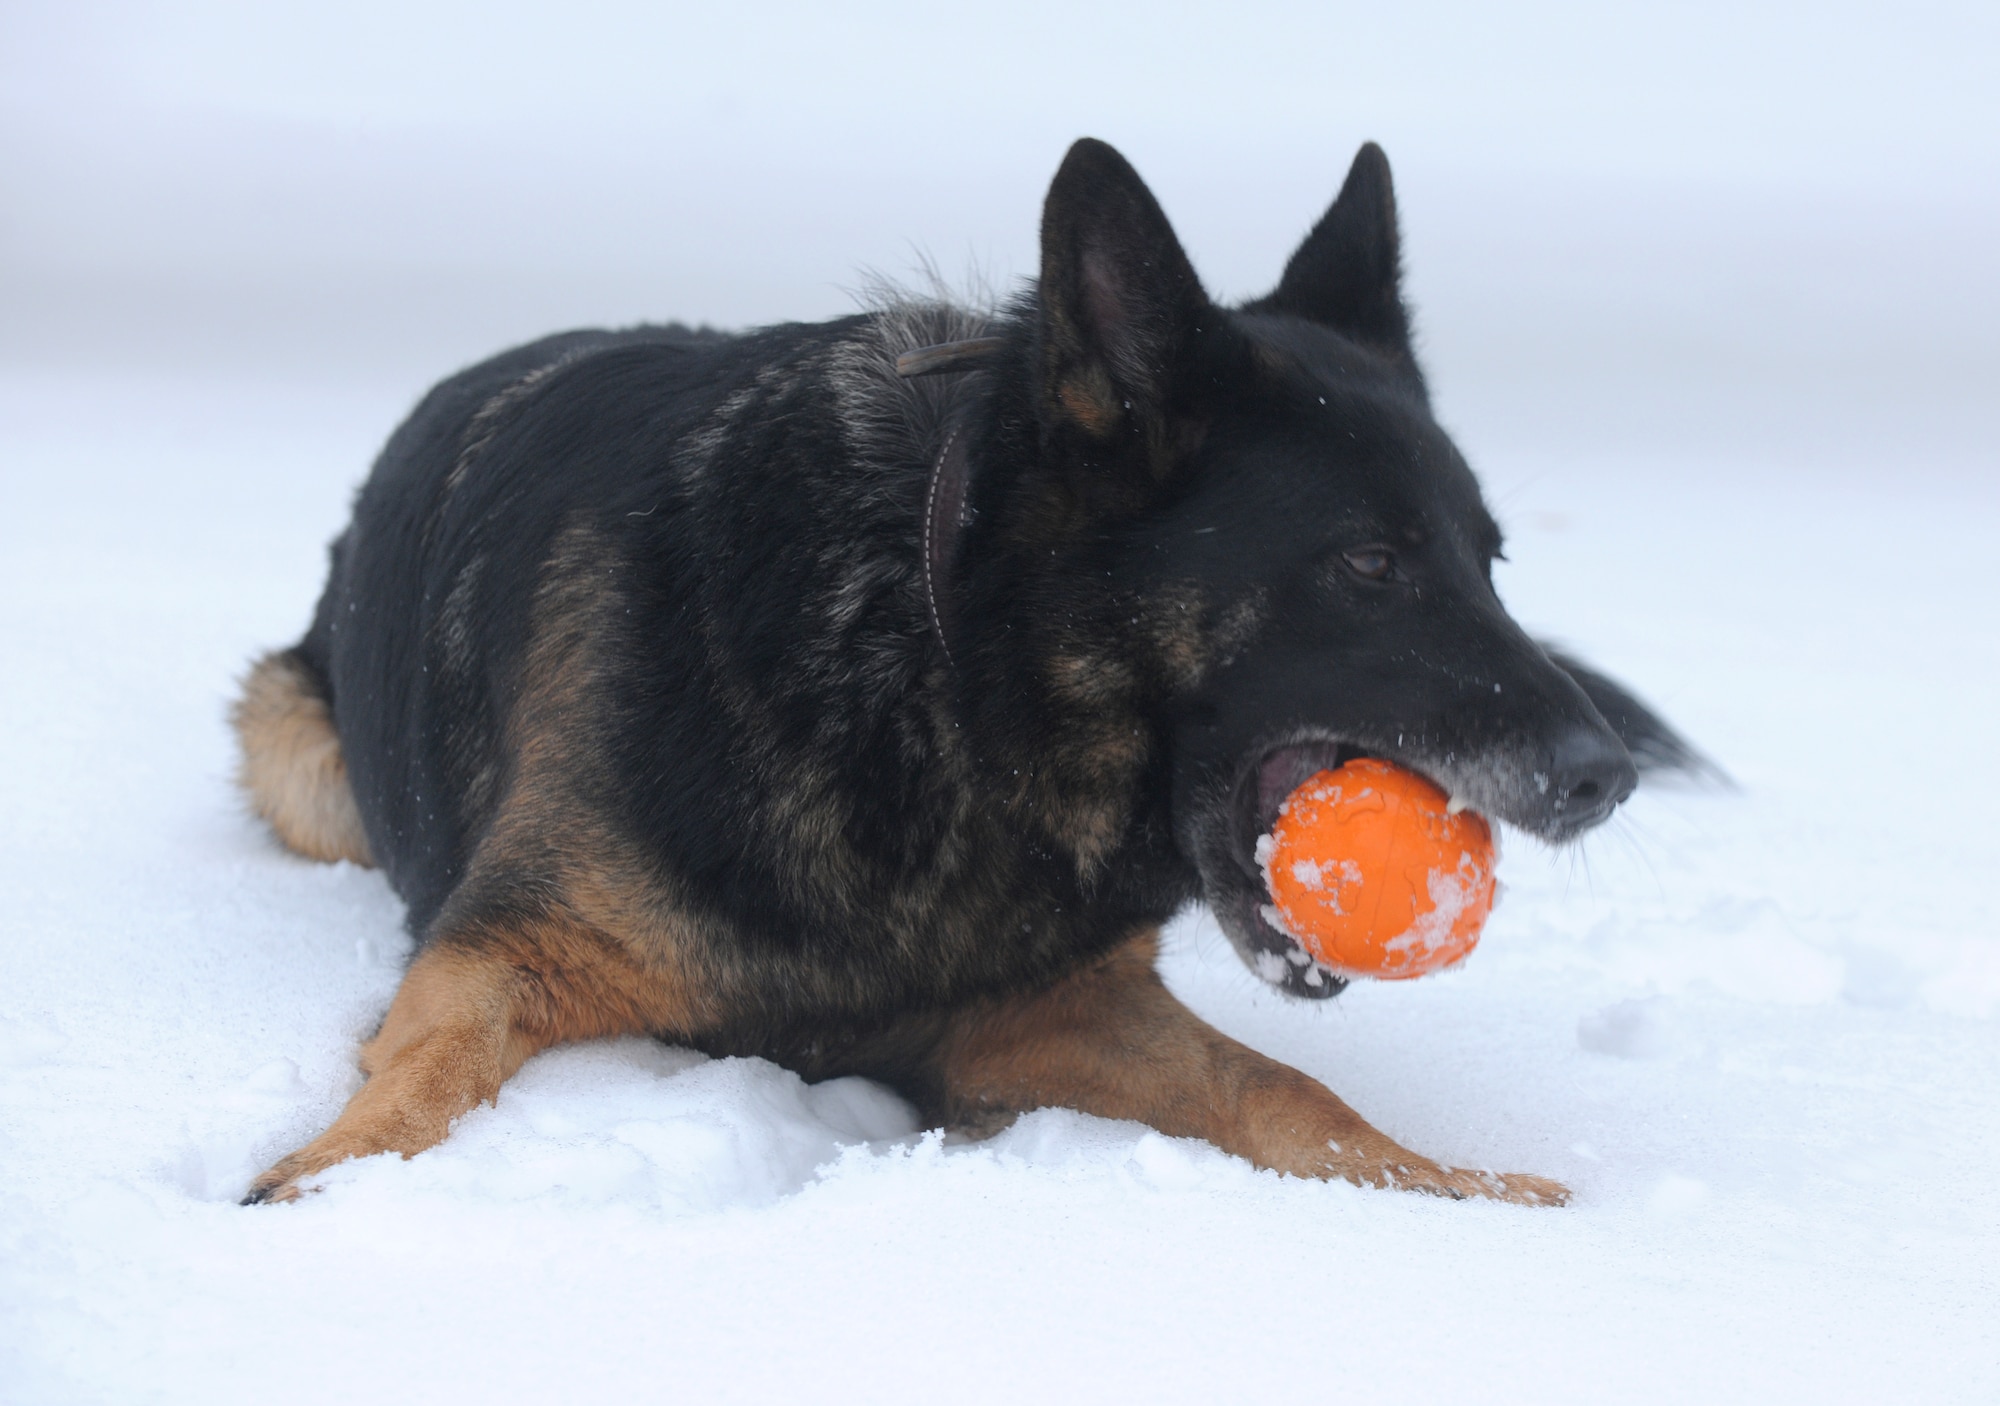 SPANGDAHLEM AIR BASE, Germany – Robson, a 5-year-old German Shepherd, plays fetch with his handler Staff Sgt. David Simpson, 52nd Security Forces Squadron military working dog handler, at the 52nd SFS military working dog facility Dec. 29. Handlers give their dogs time to play outside to acclimate them to cold German winters and harsh conditions that they must work in. (U.S. Air Force photo/Senior Airman Nathanael Callon)